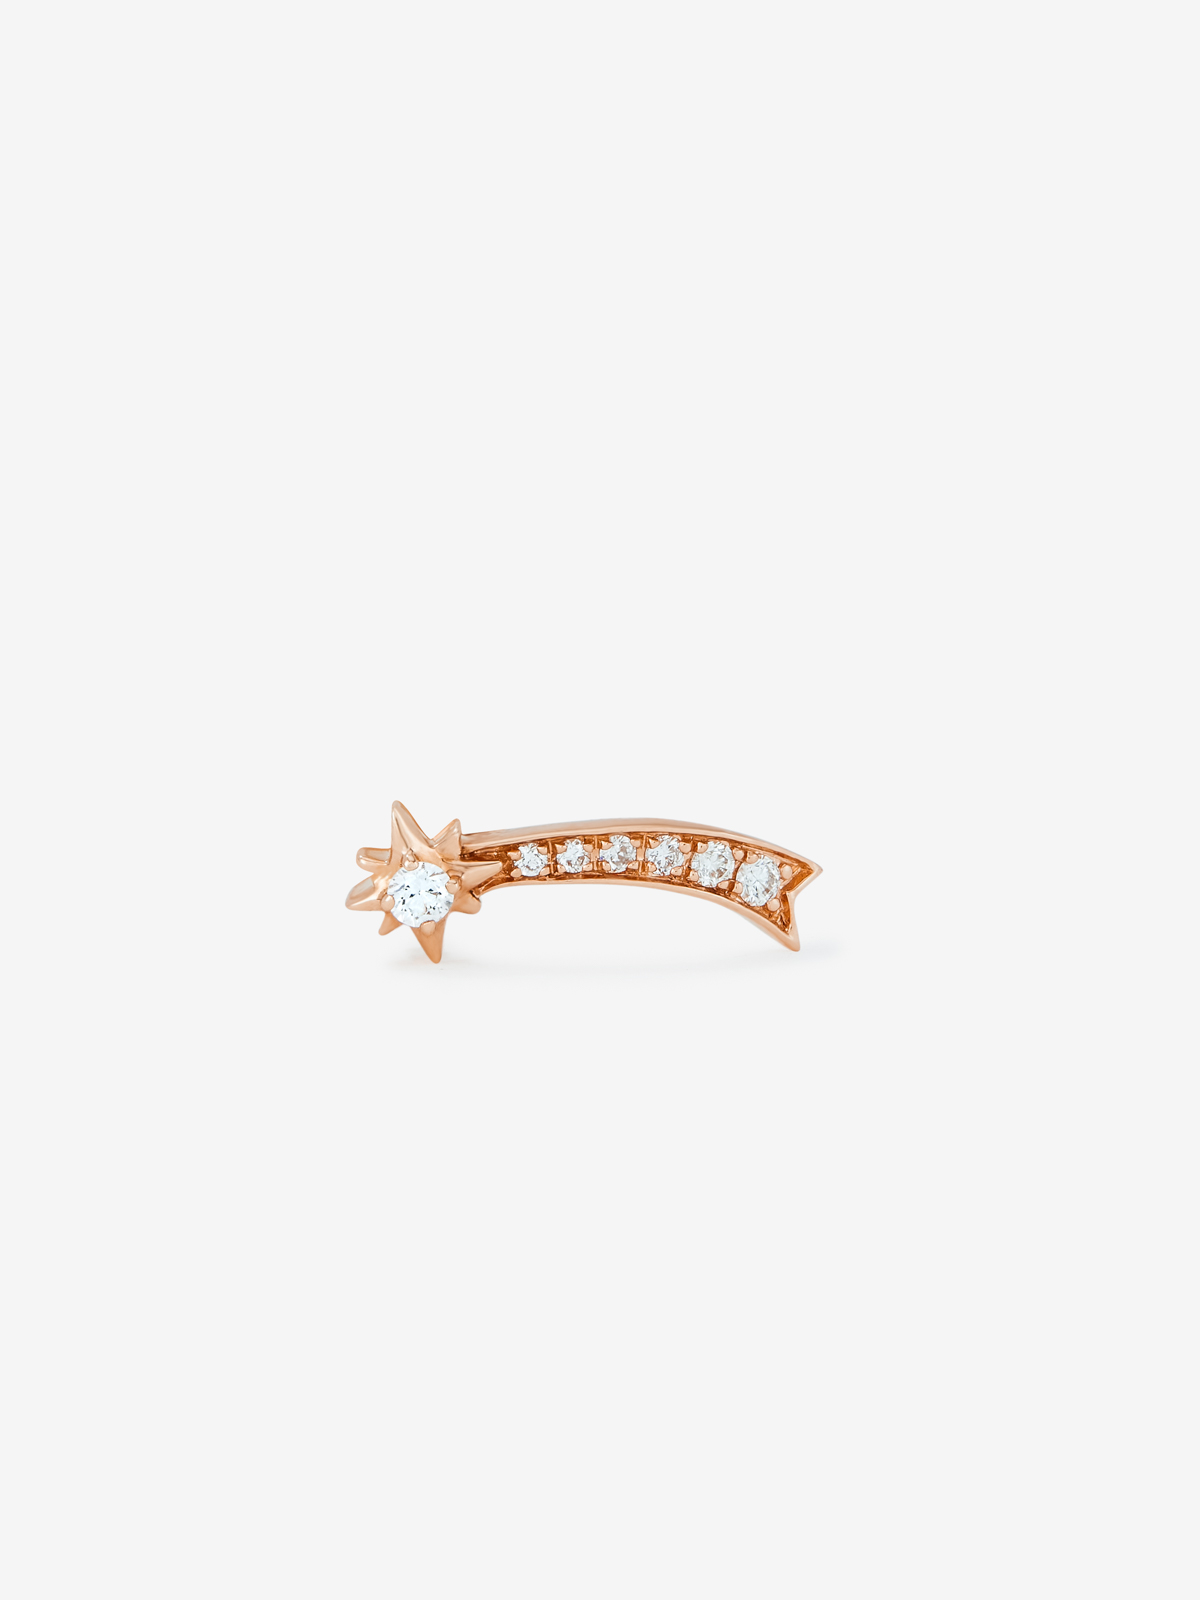 Individual left climber shooting star earring in 18K rose gold with diamonds